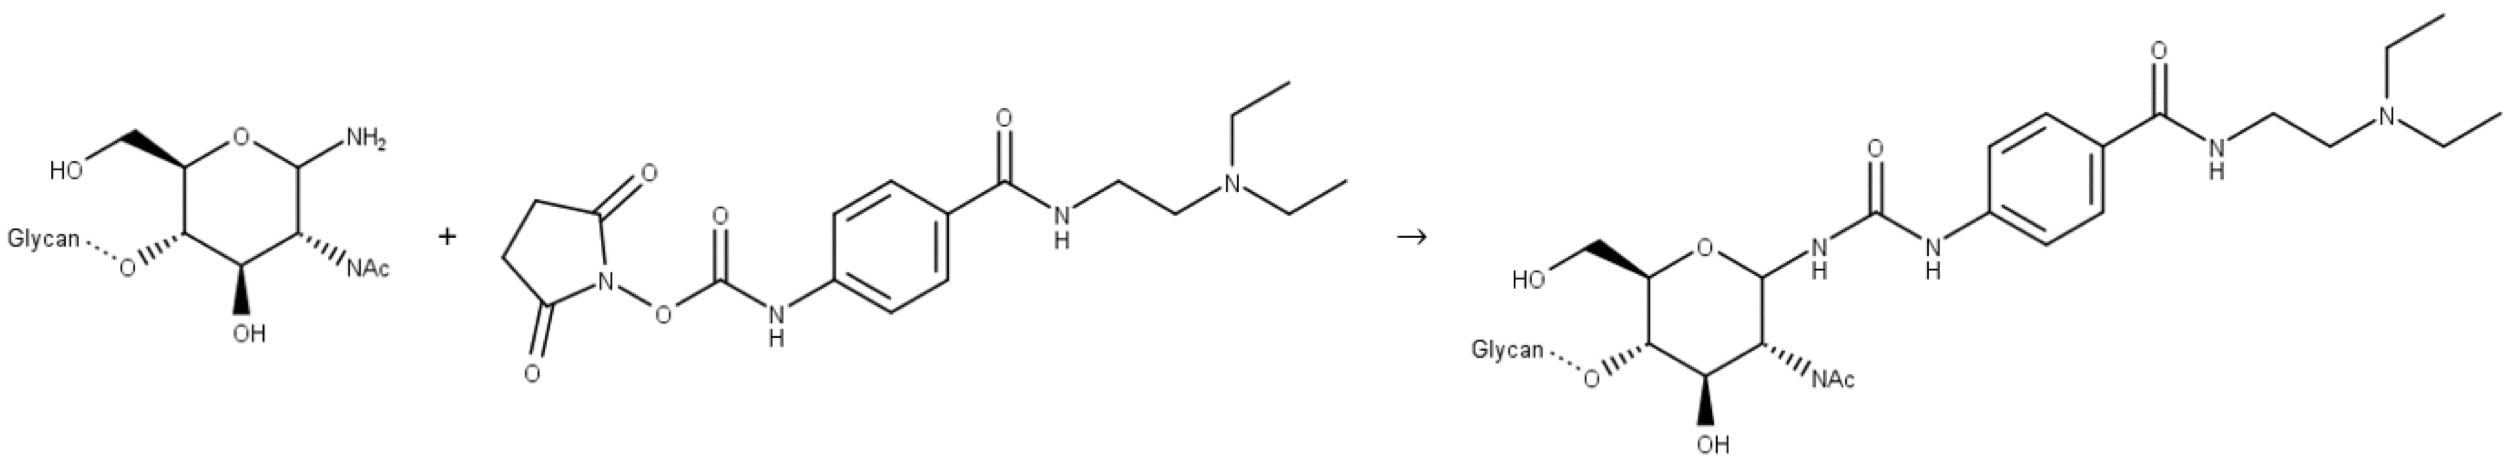 Reaction of a release N-glycan with InstantPC.